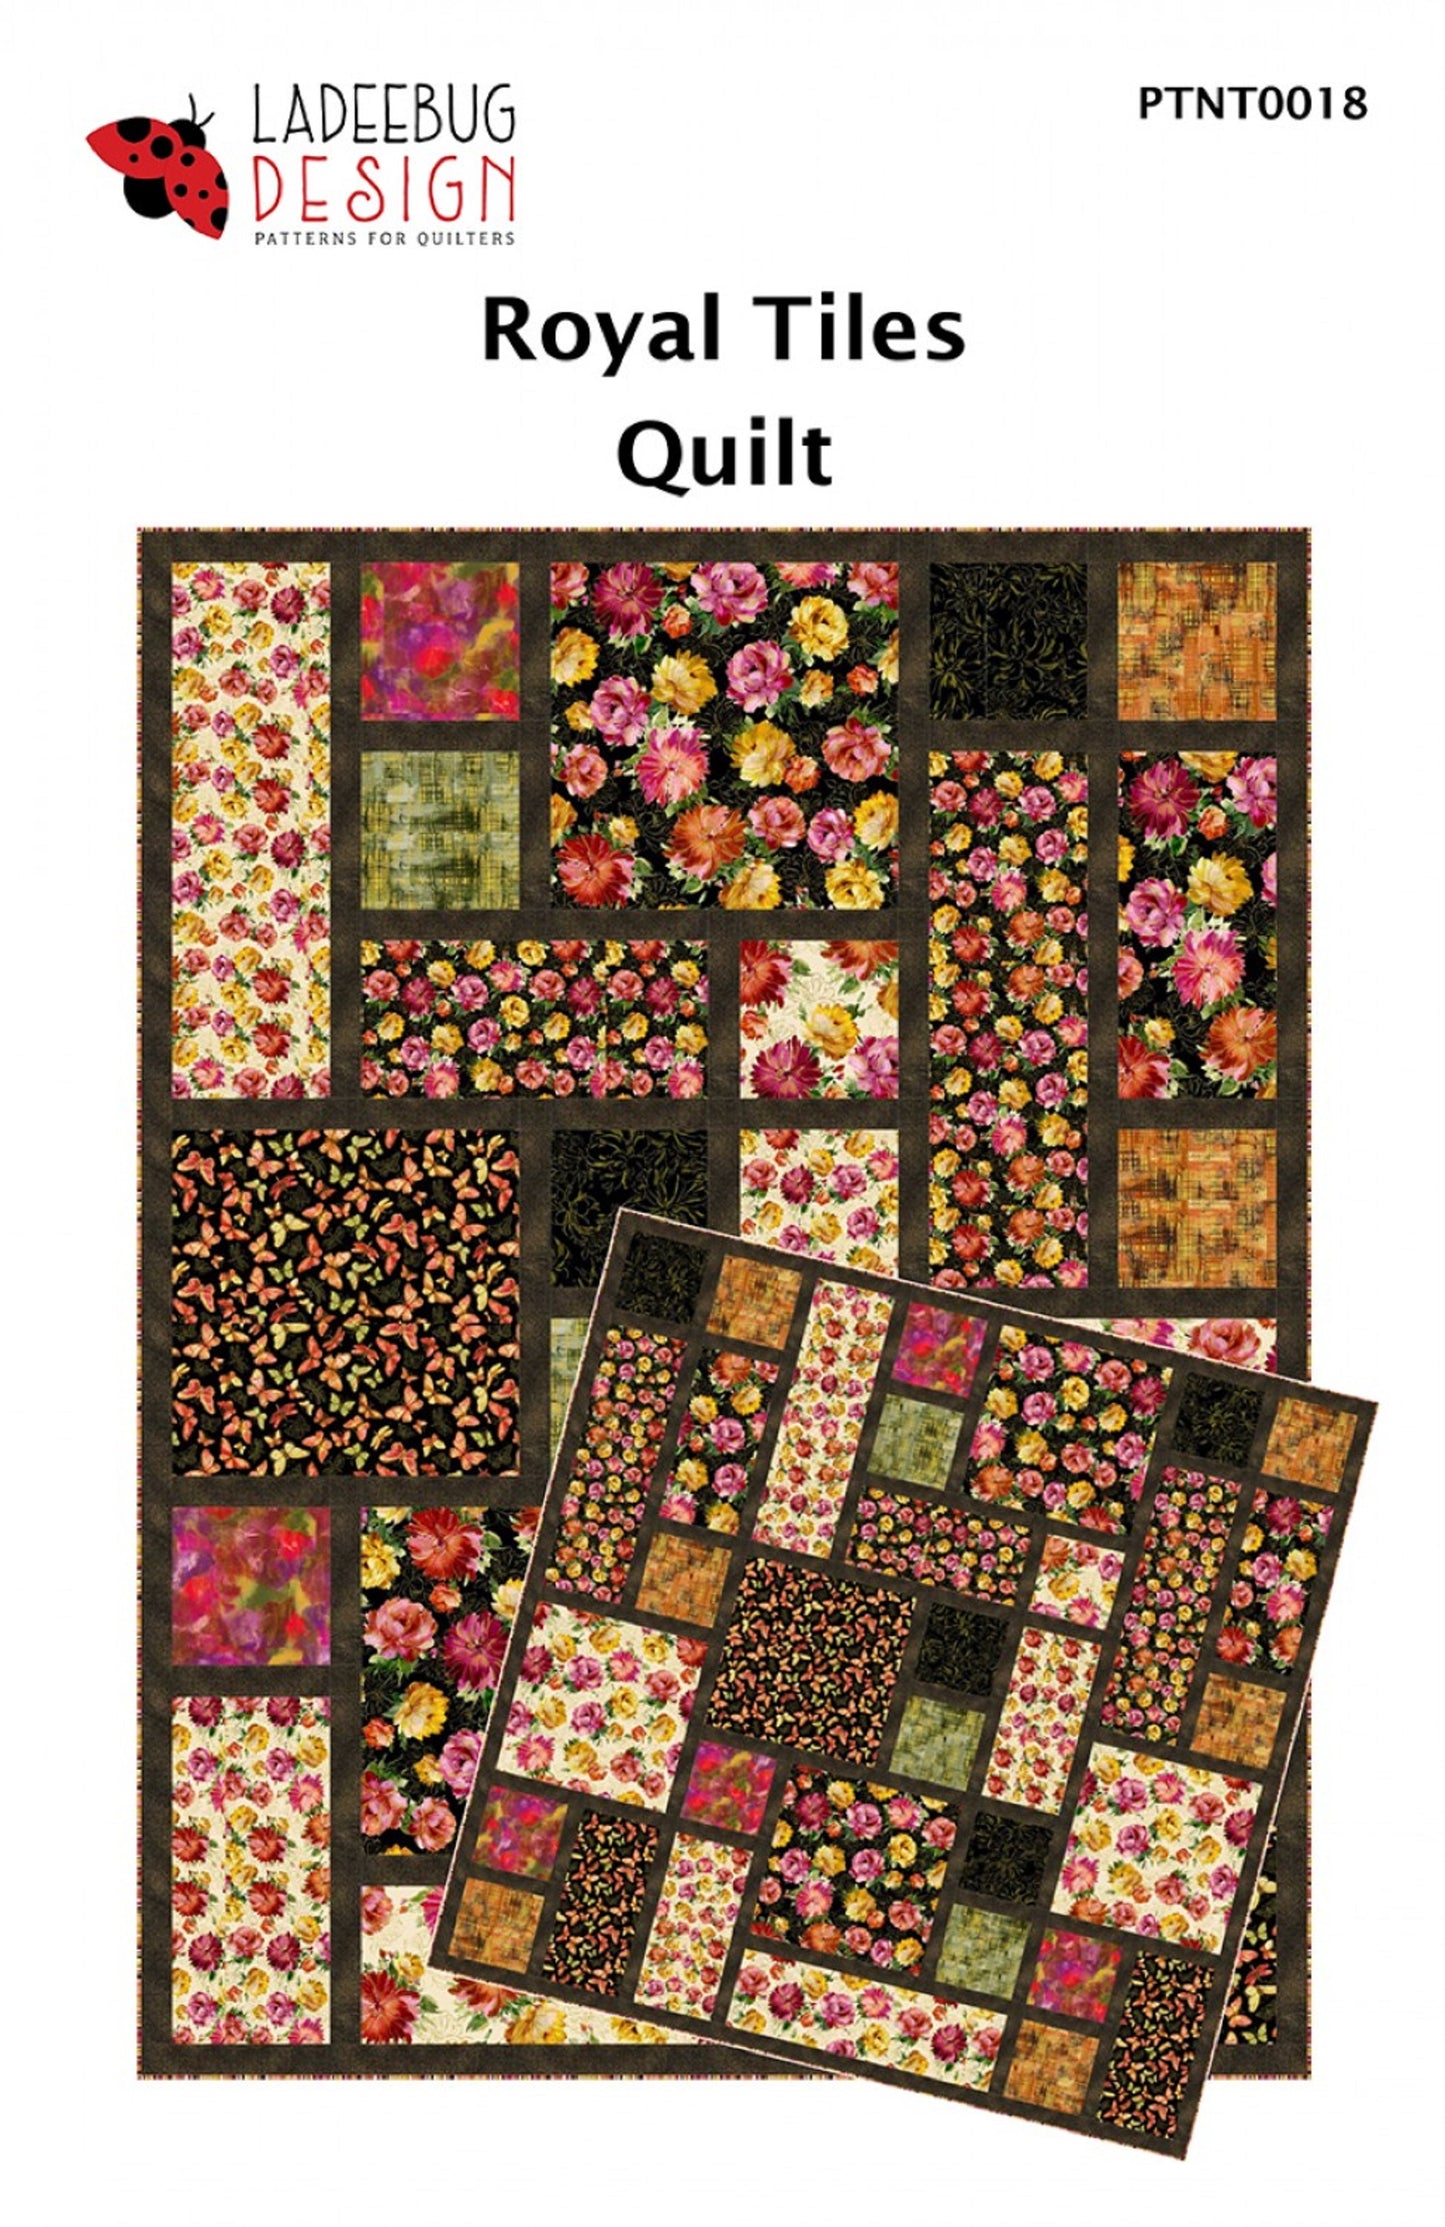 Royal Tiles Quilt Pattern by Ladeebug Designs